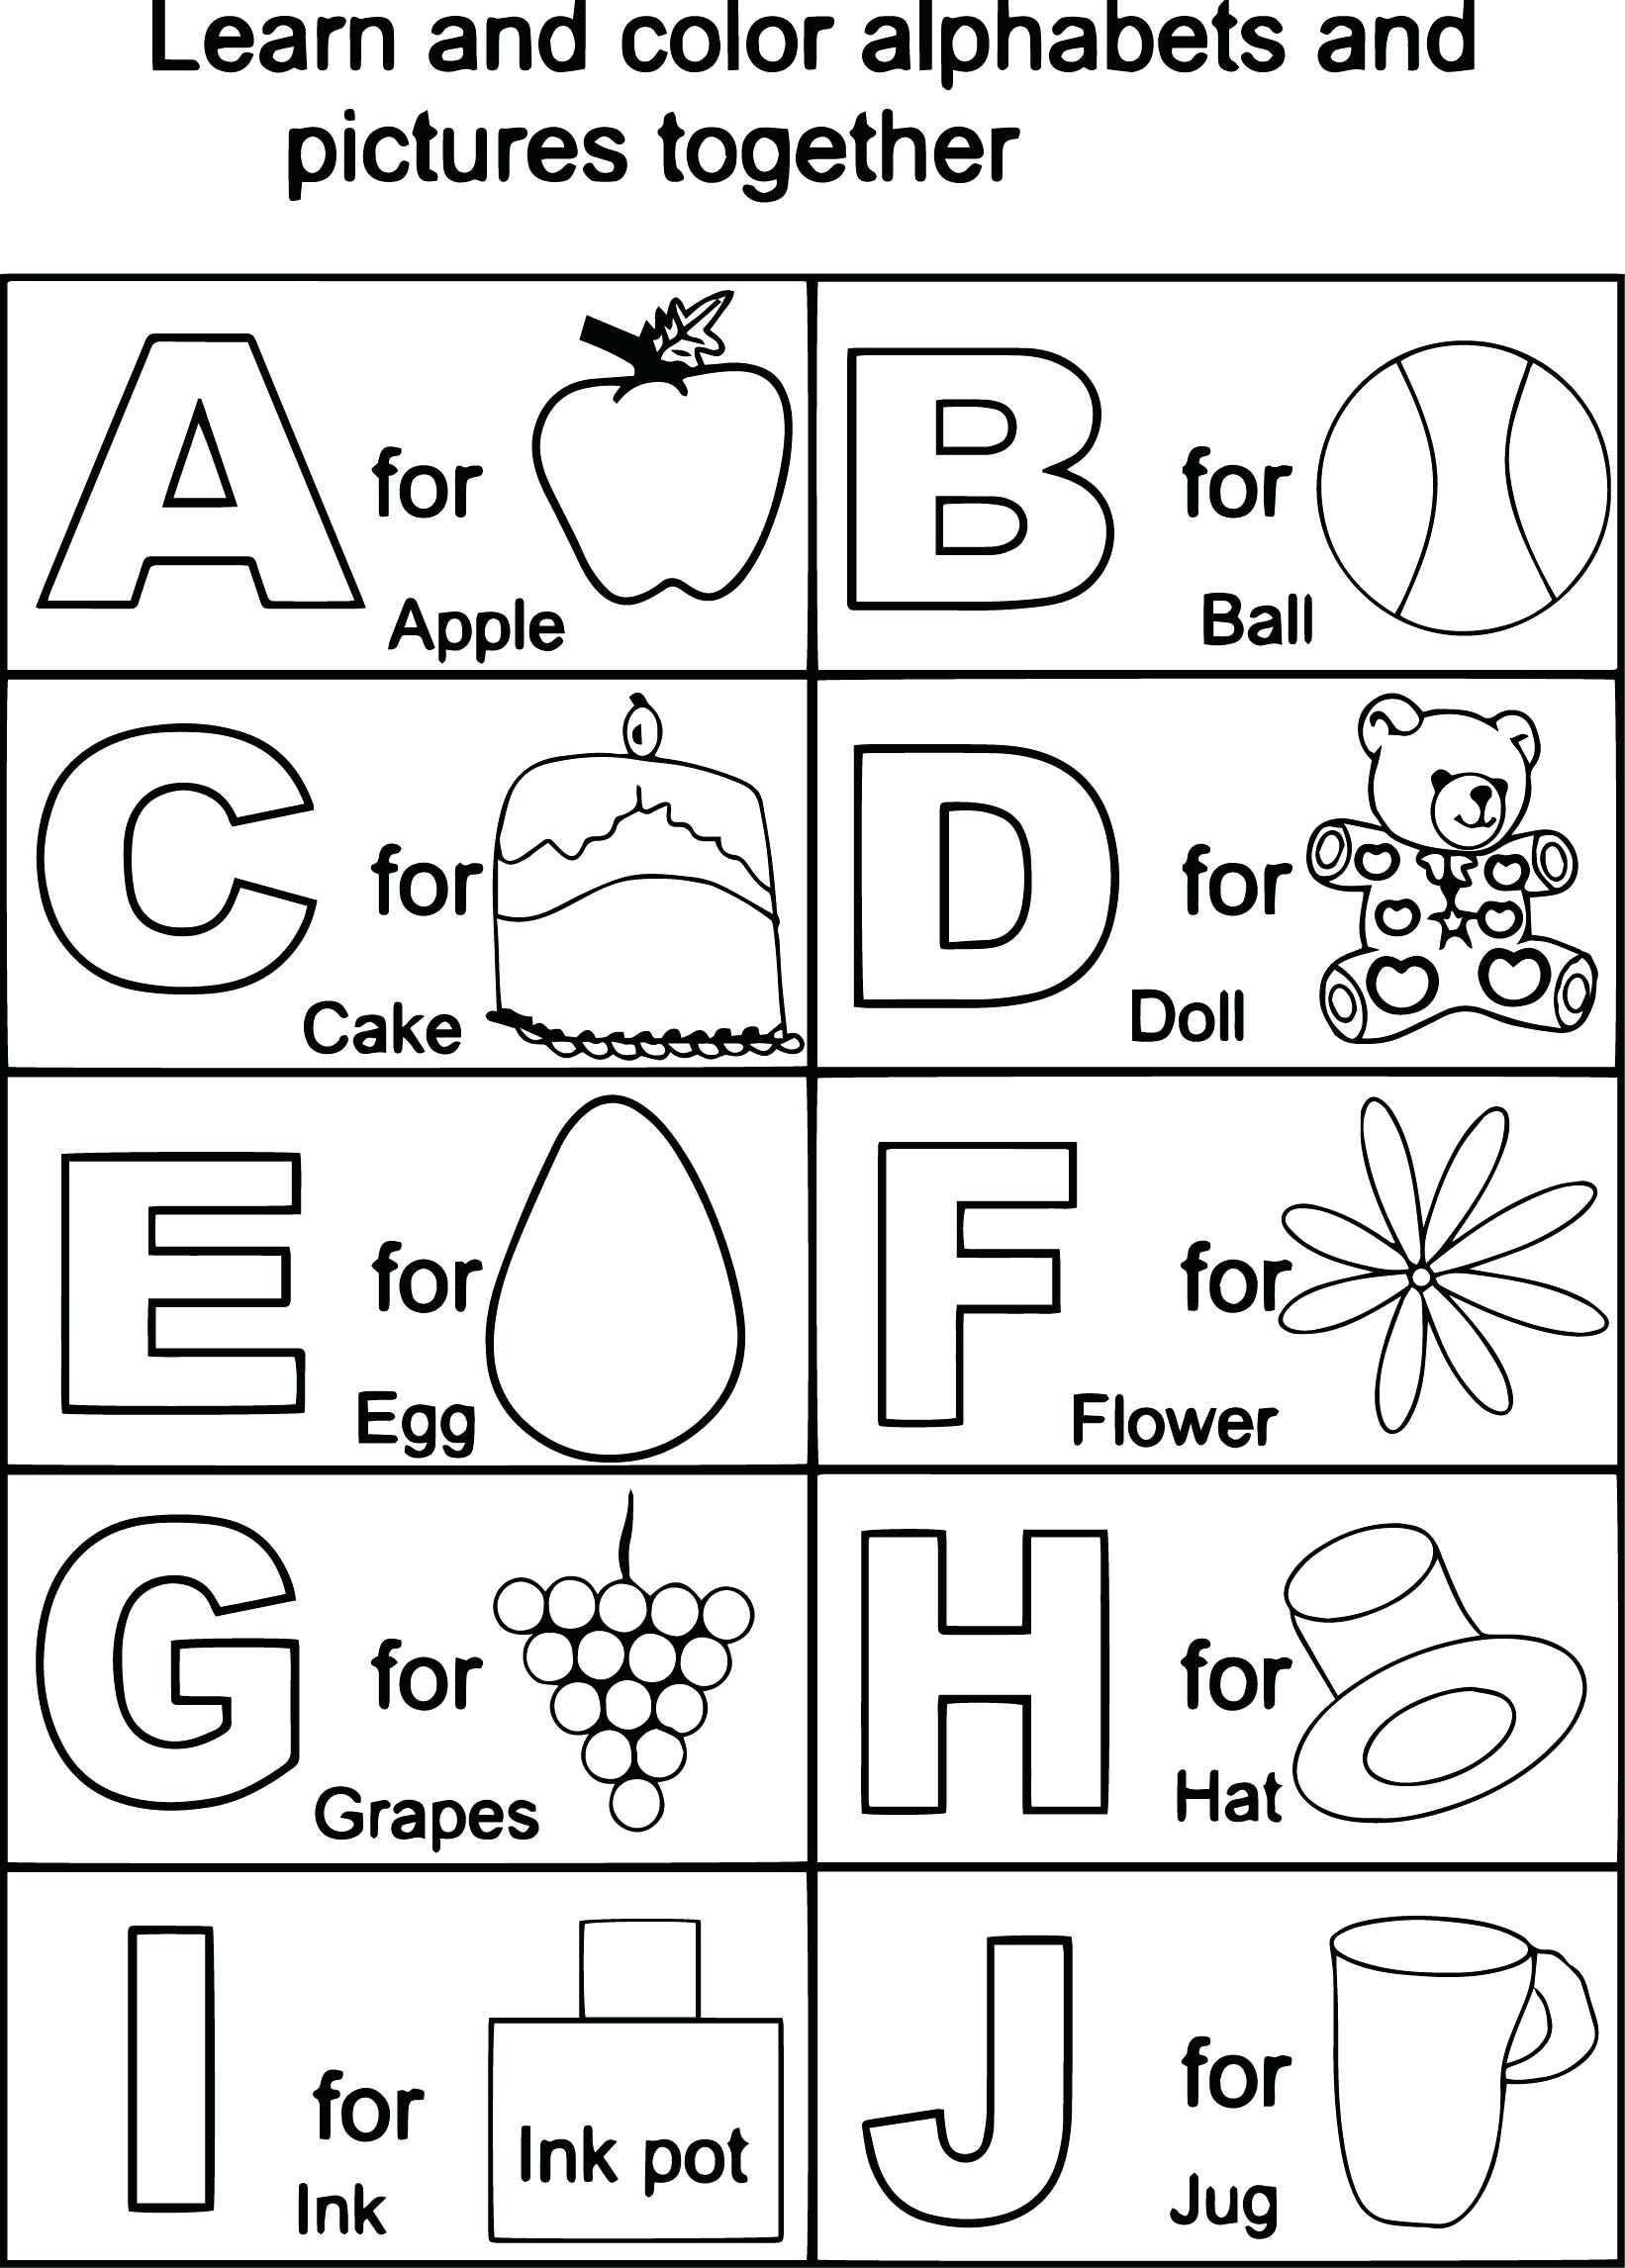 free color by letter printables for kindergarten printable templates - alphabet coloring pages easy peasy learners | kindergarten letter coloring worksheets